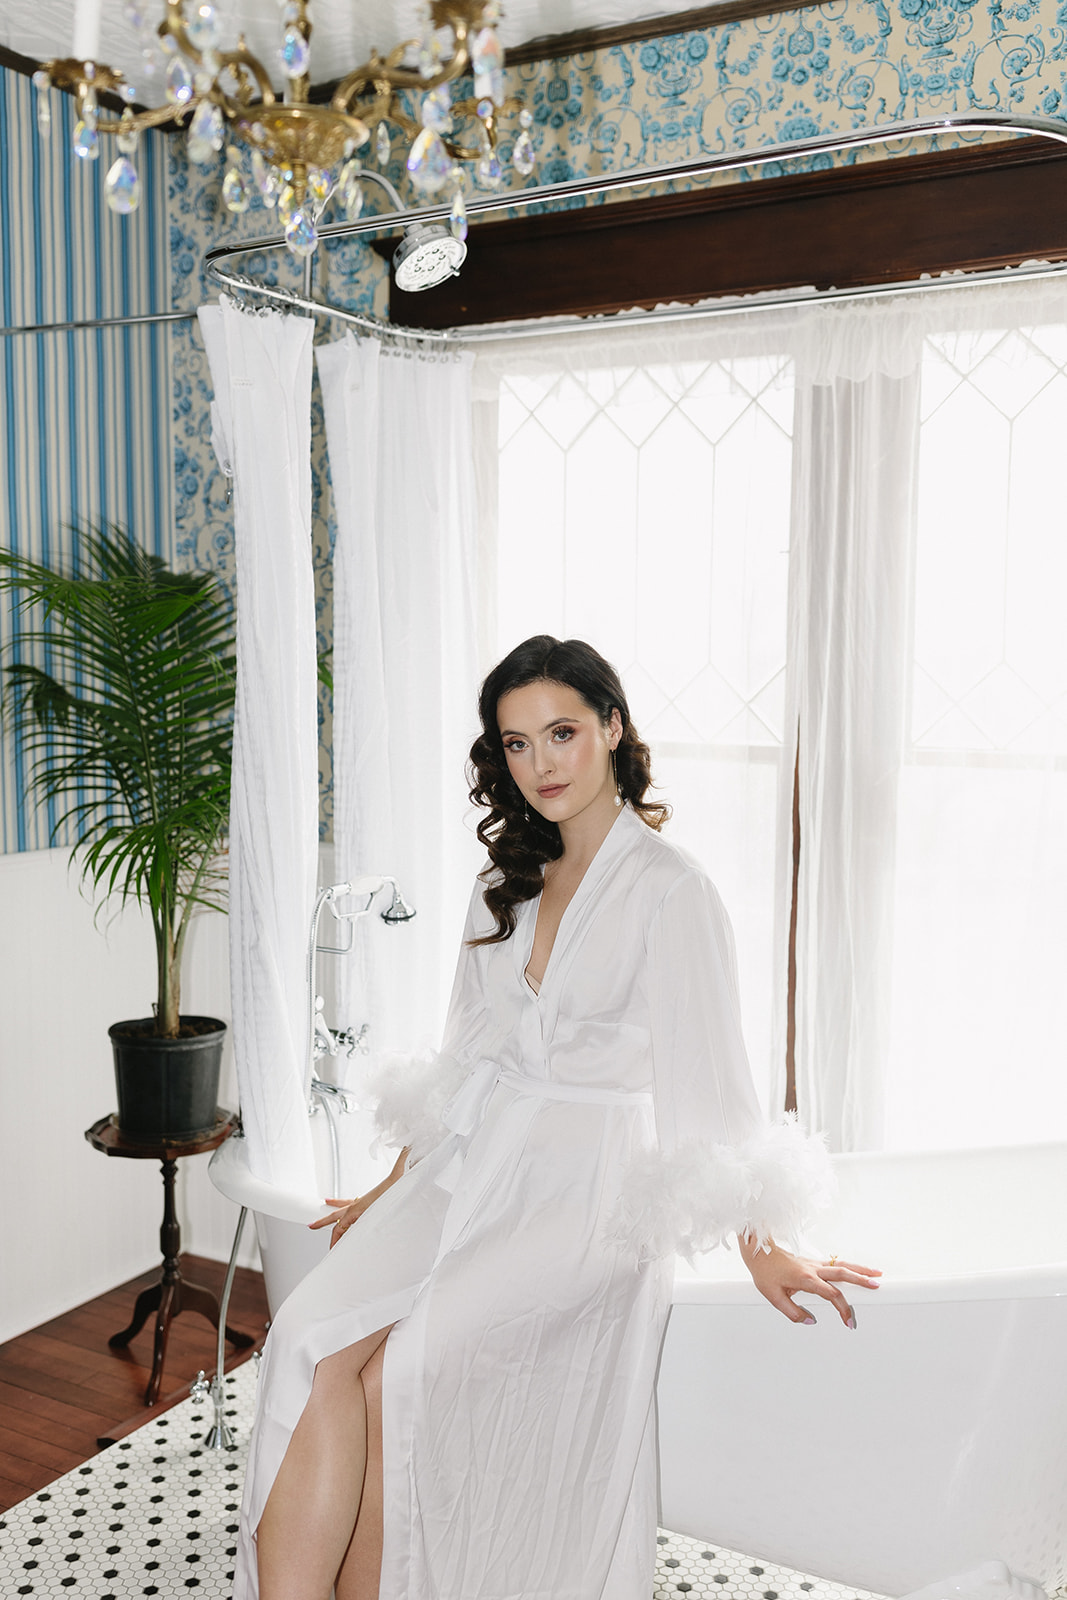 Chic Bridal Inspiration & Getting Ready Photos Perfect for the Fashion-Forward Bride. Bride wearing feather lined robe.